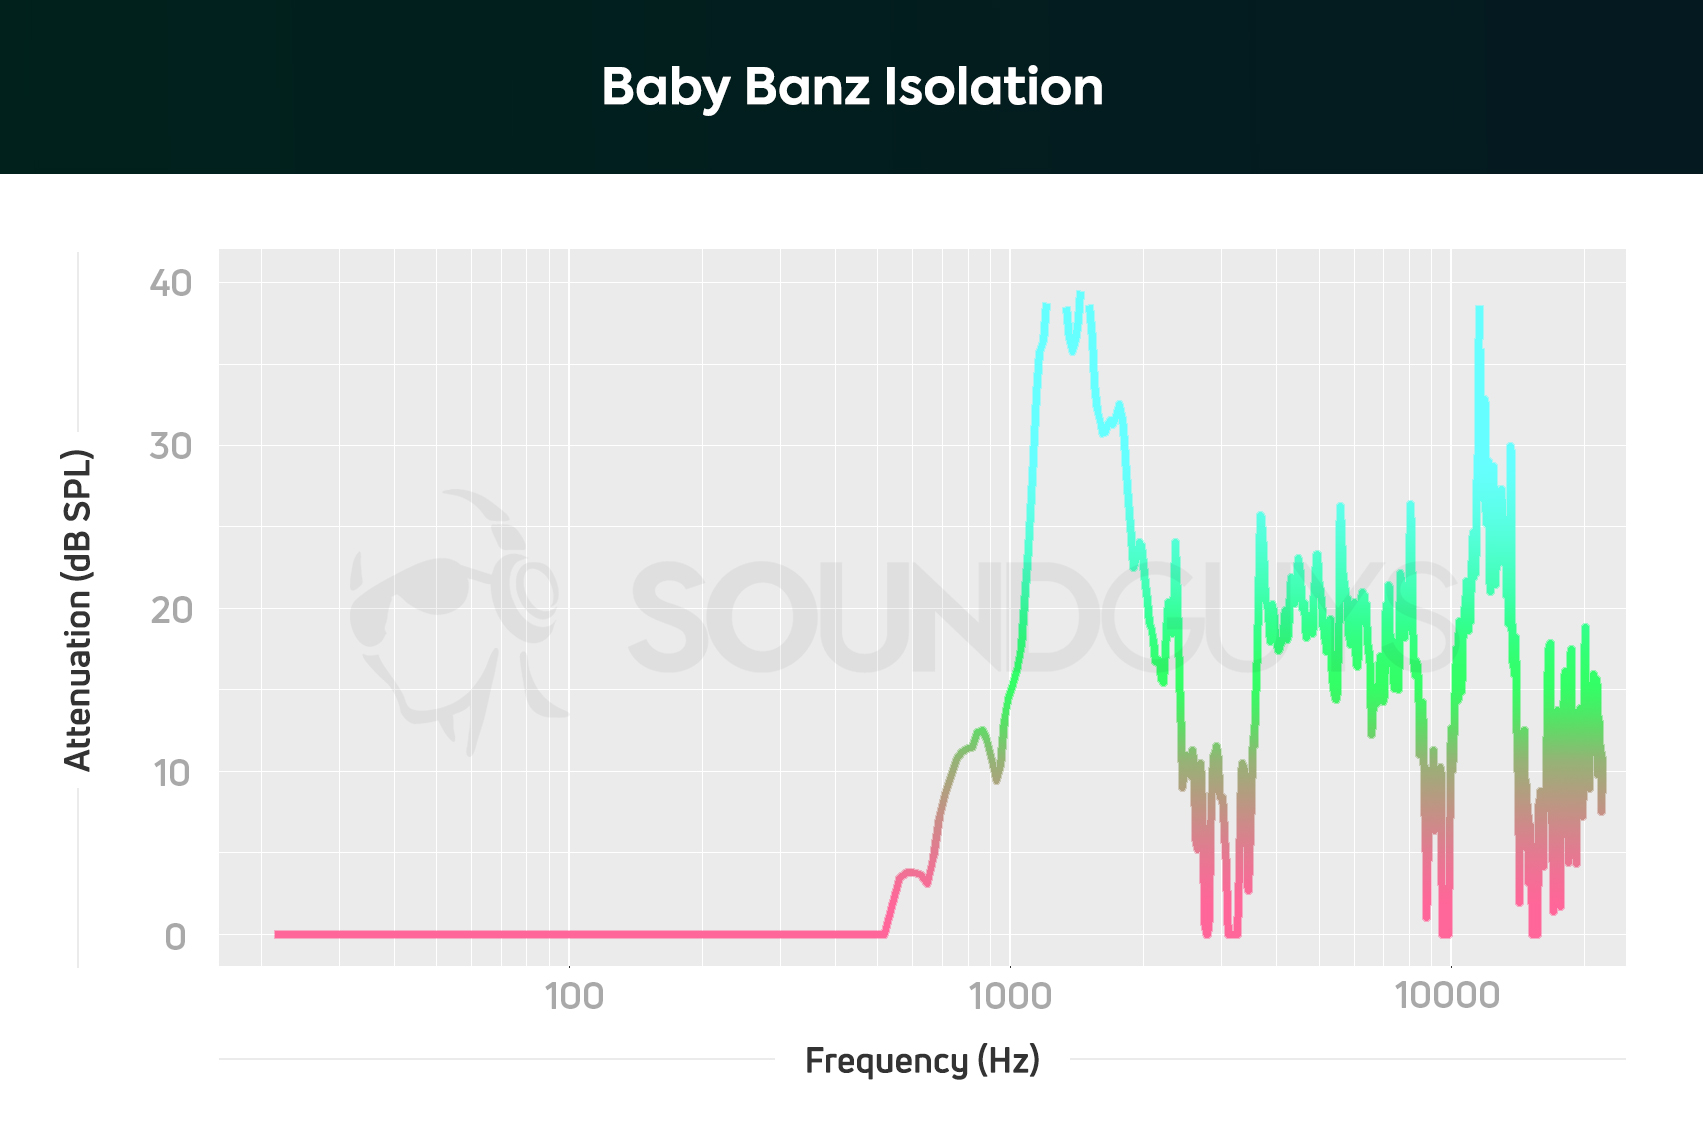 An isolation chart of the Baby Banz hearing protectors.